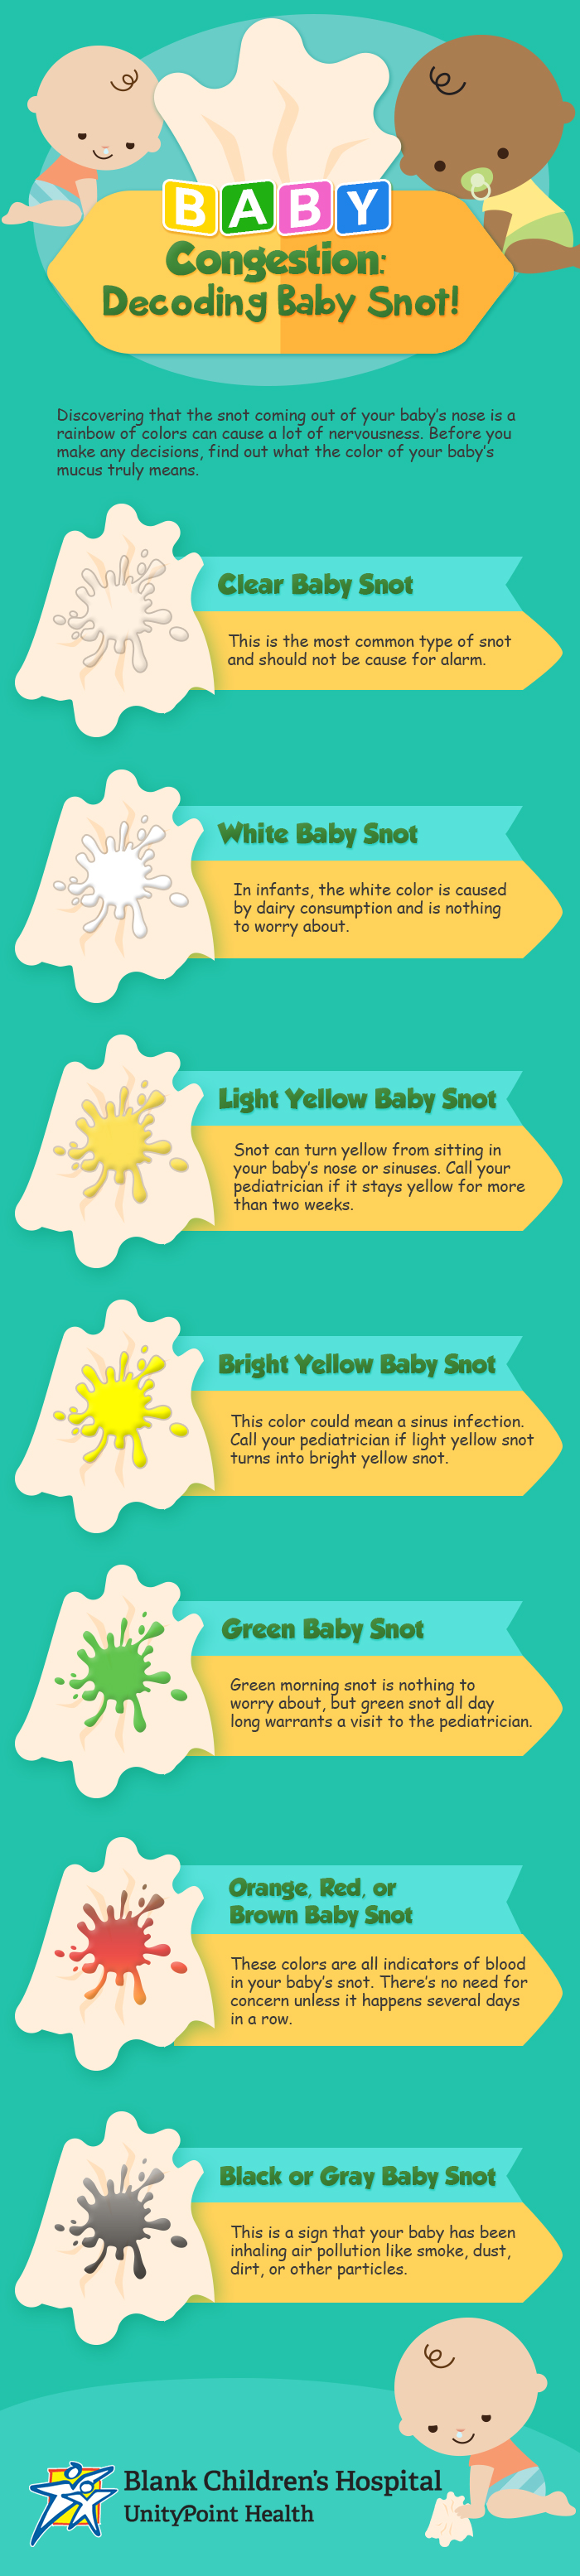 Baby Congestion: Decoding Baby's Snot! | Visual.ly